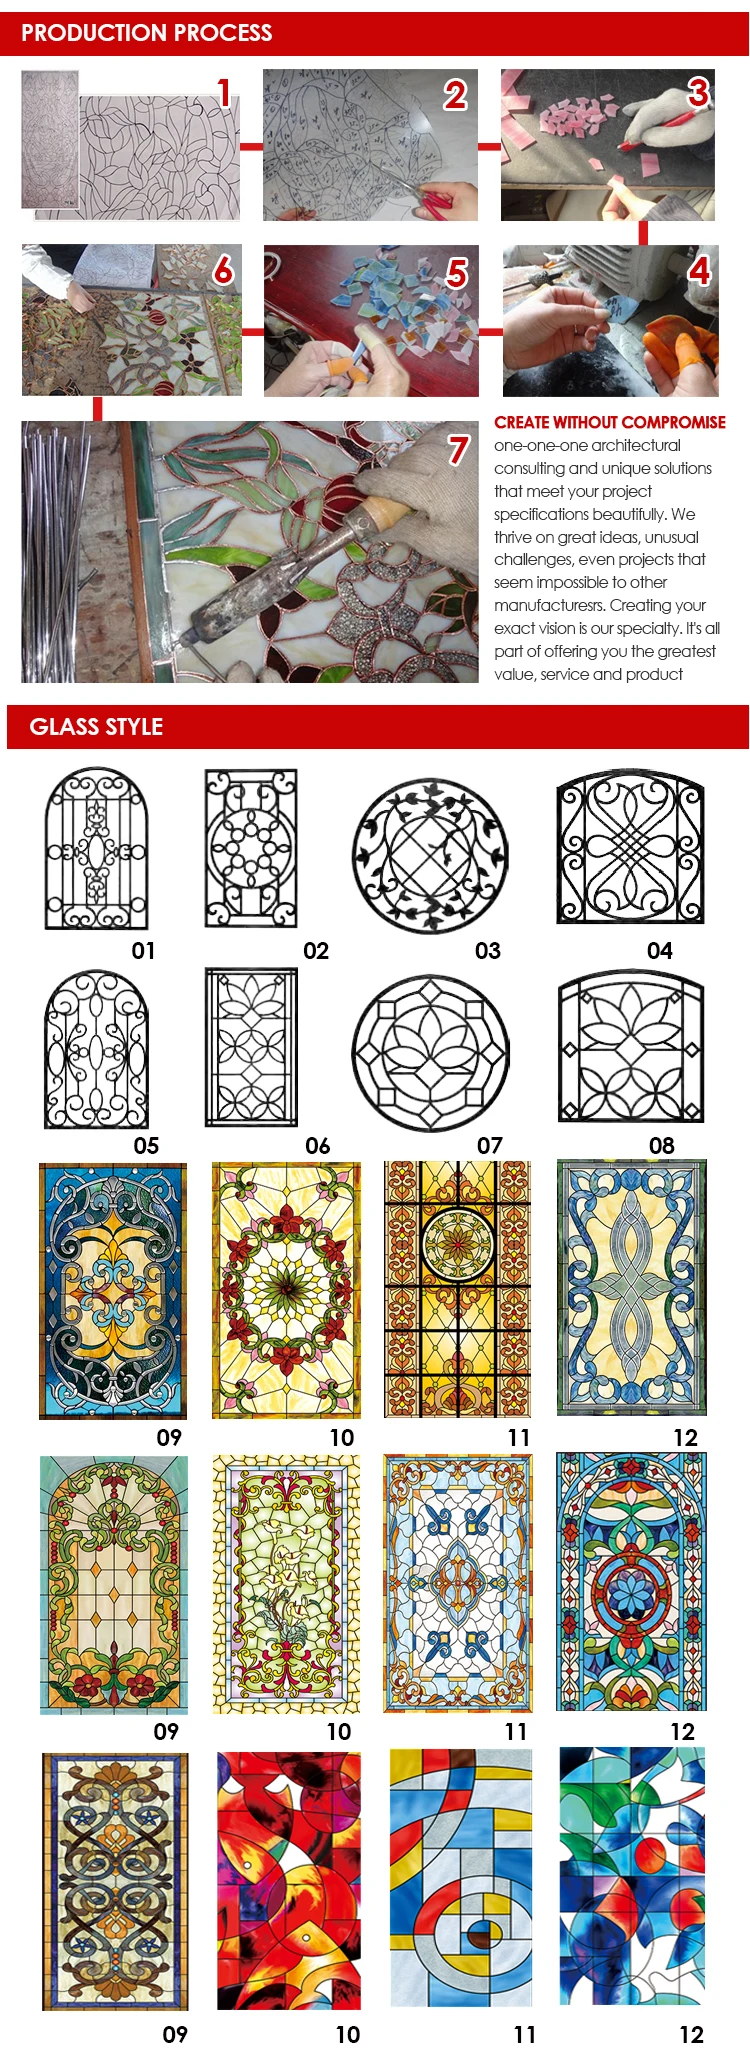 Factory outlet selling stained glass windows